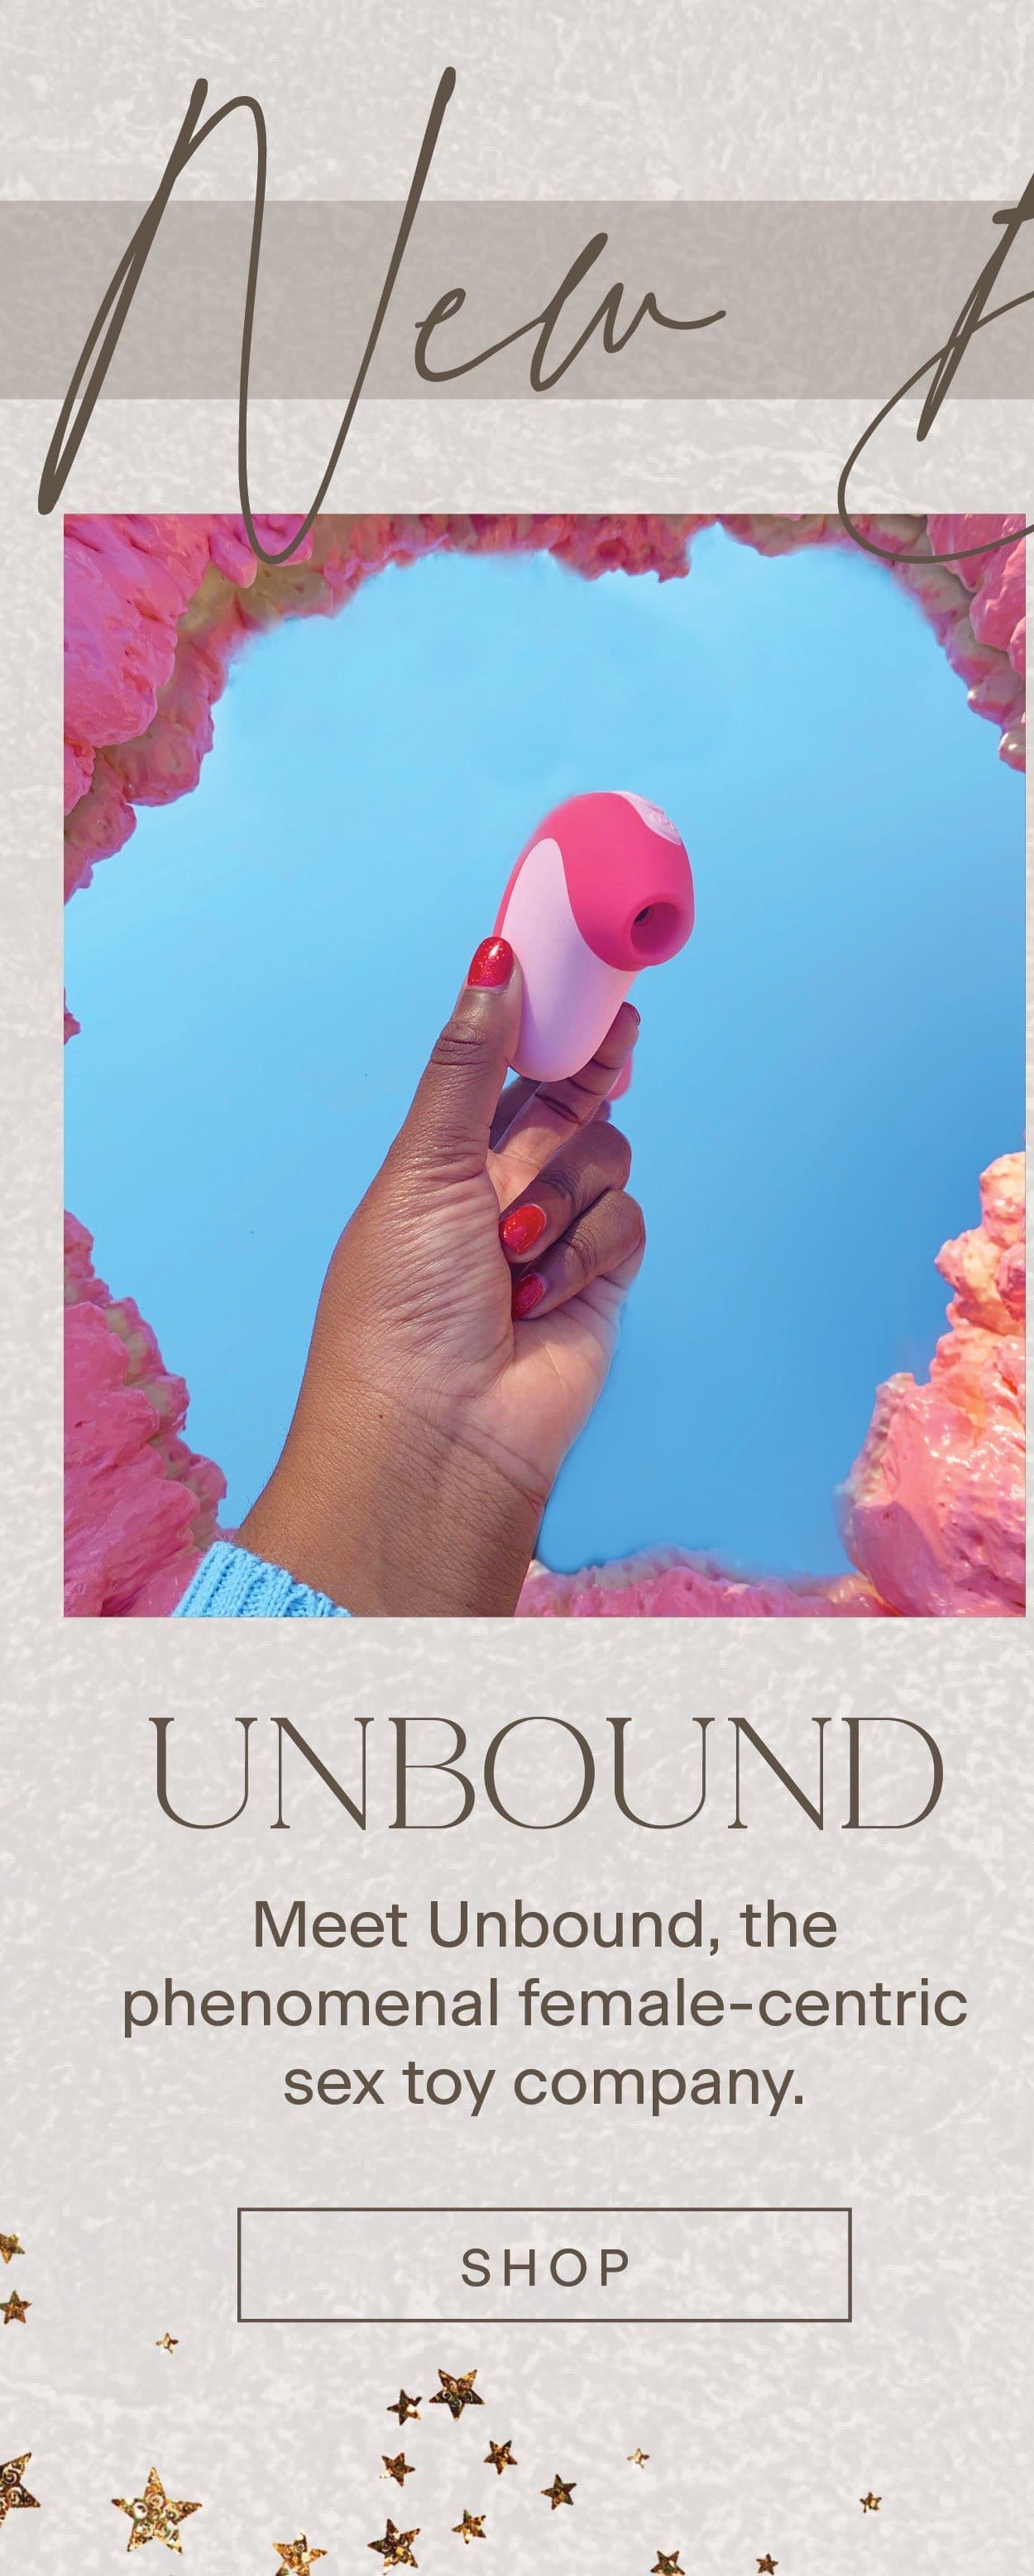 Meet Unbound, the phenomenal female-centric sex toy company.